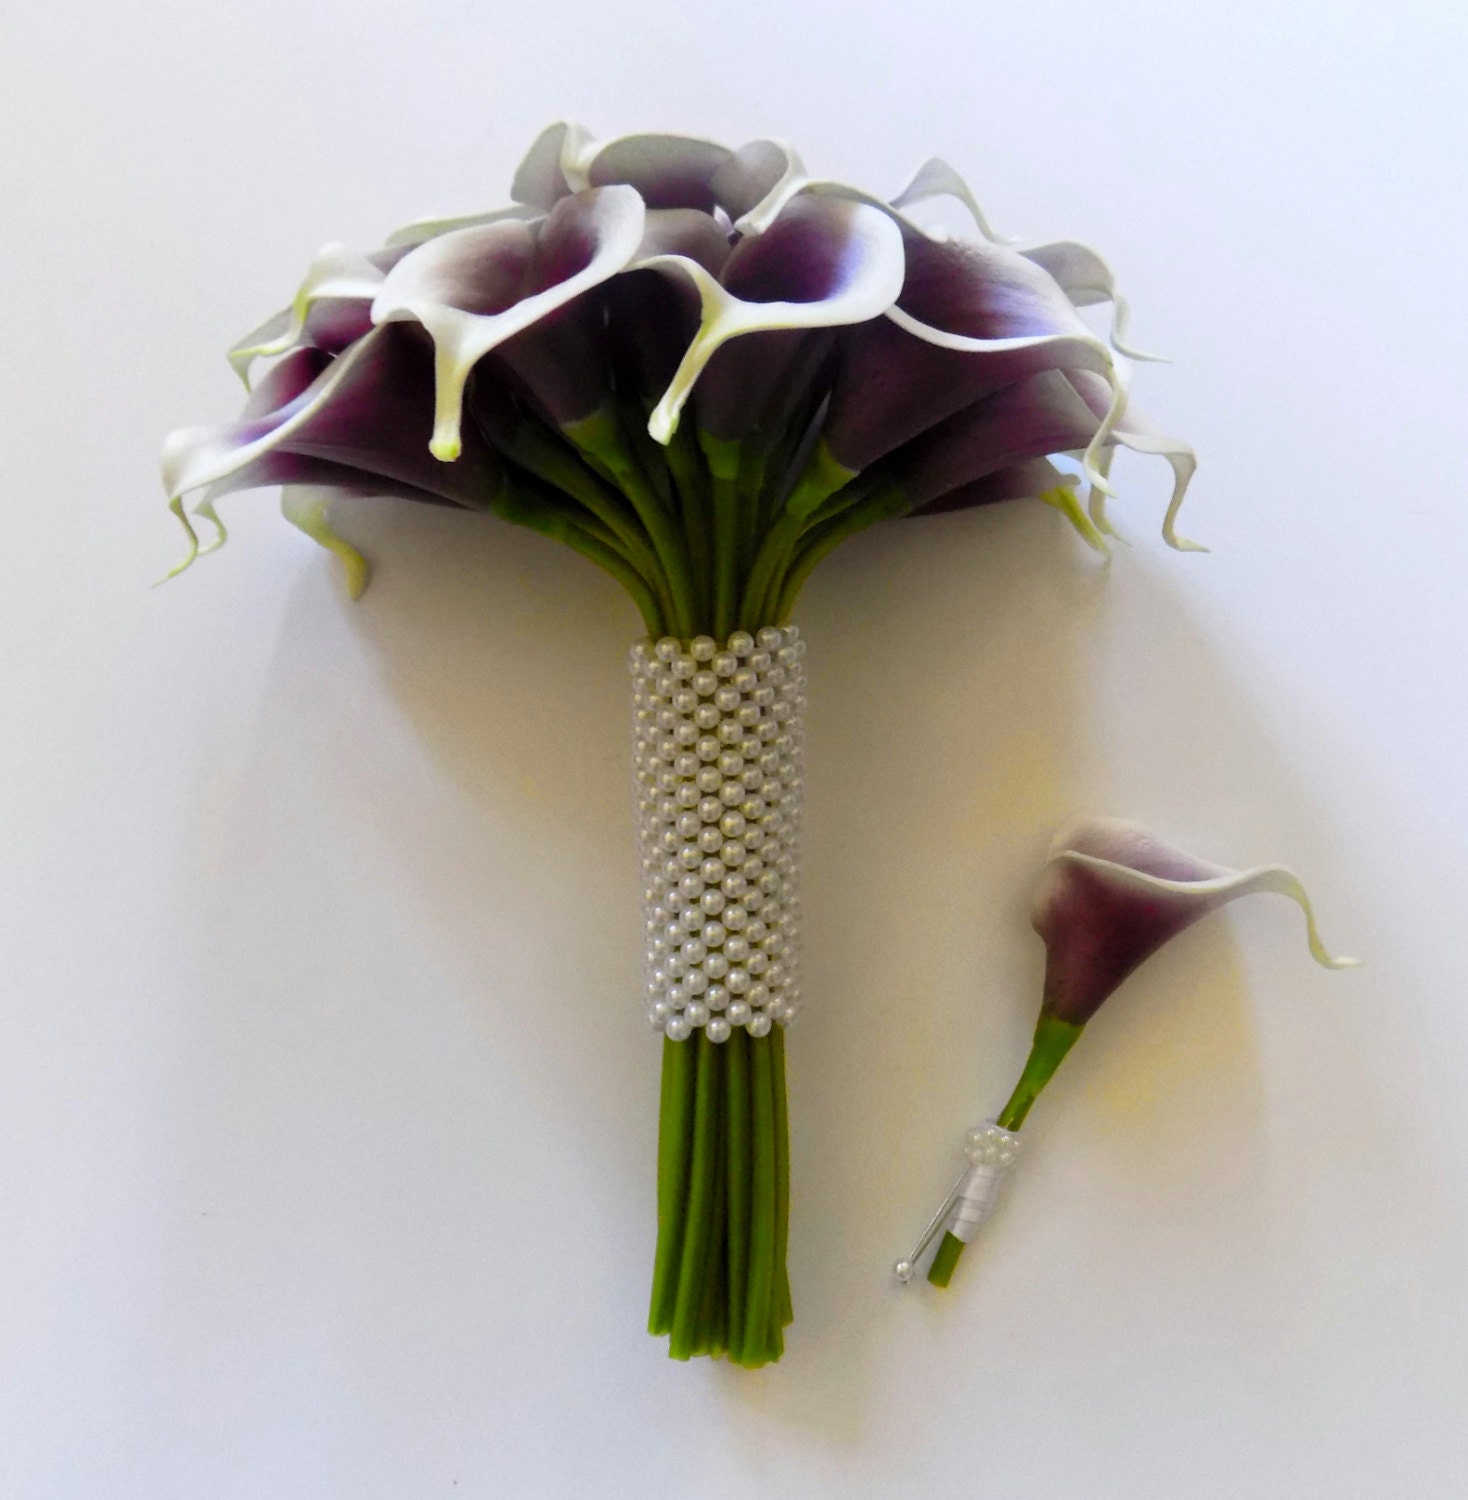 Picasso Calla Lily Bridal Bouquet with by shannonkristina on Etsy